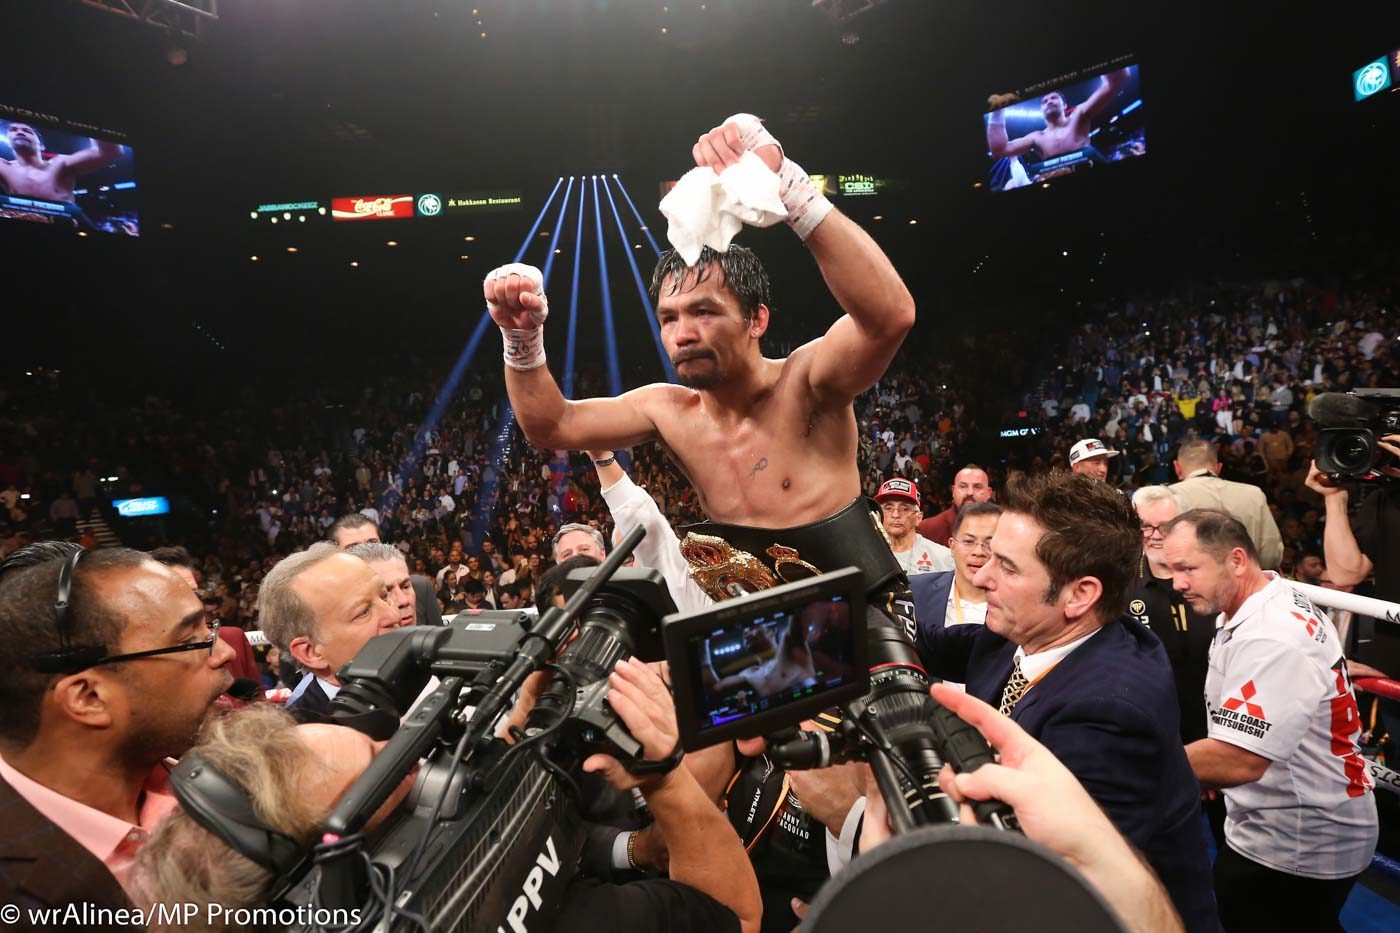 If not Mayweather, who’s next for Pacquiao?